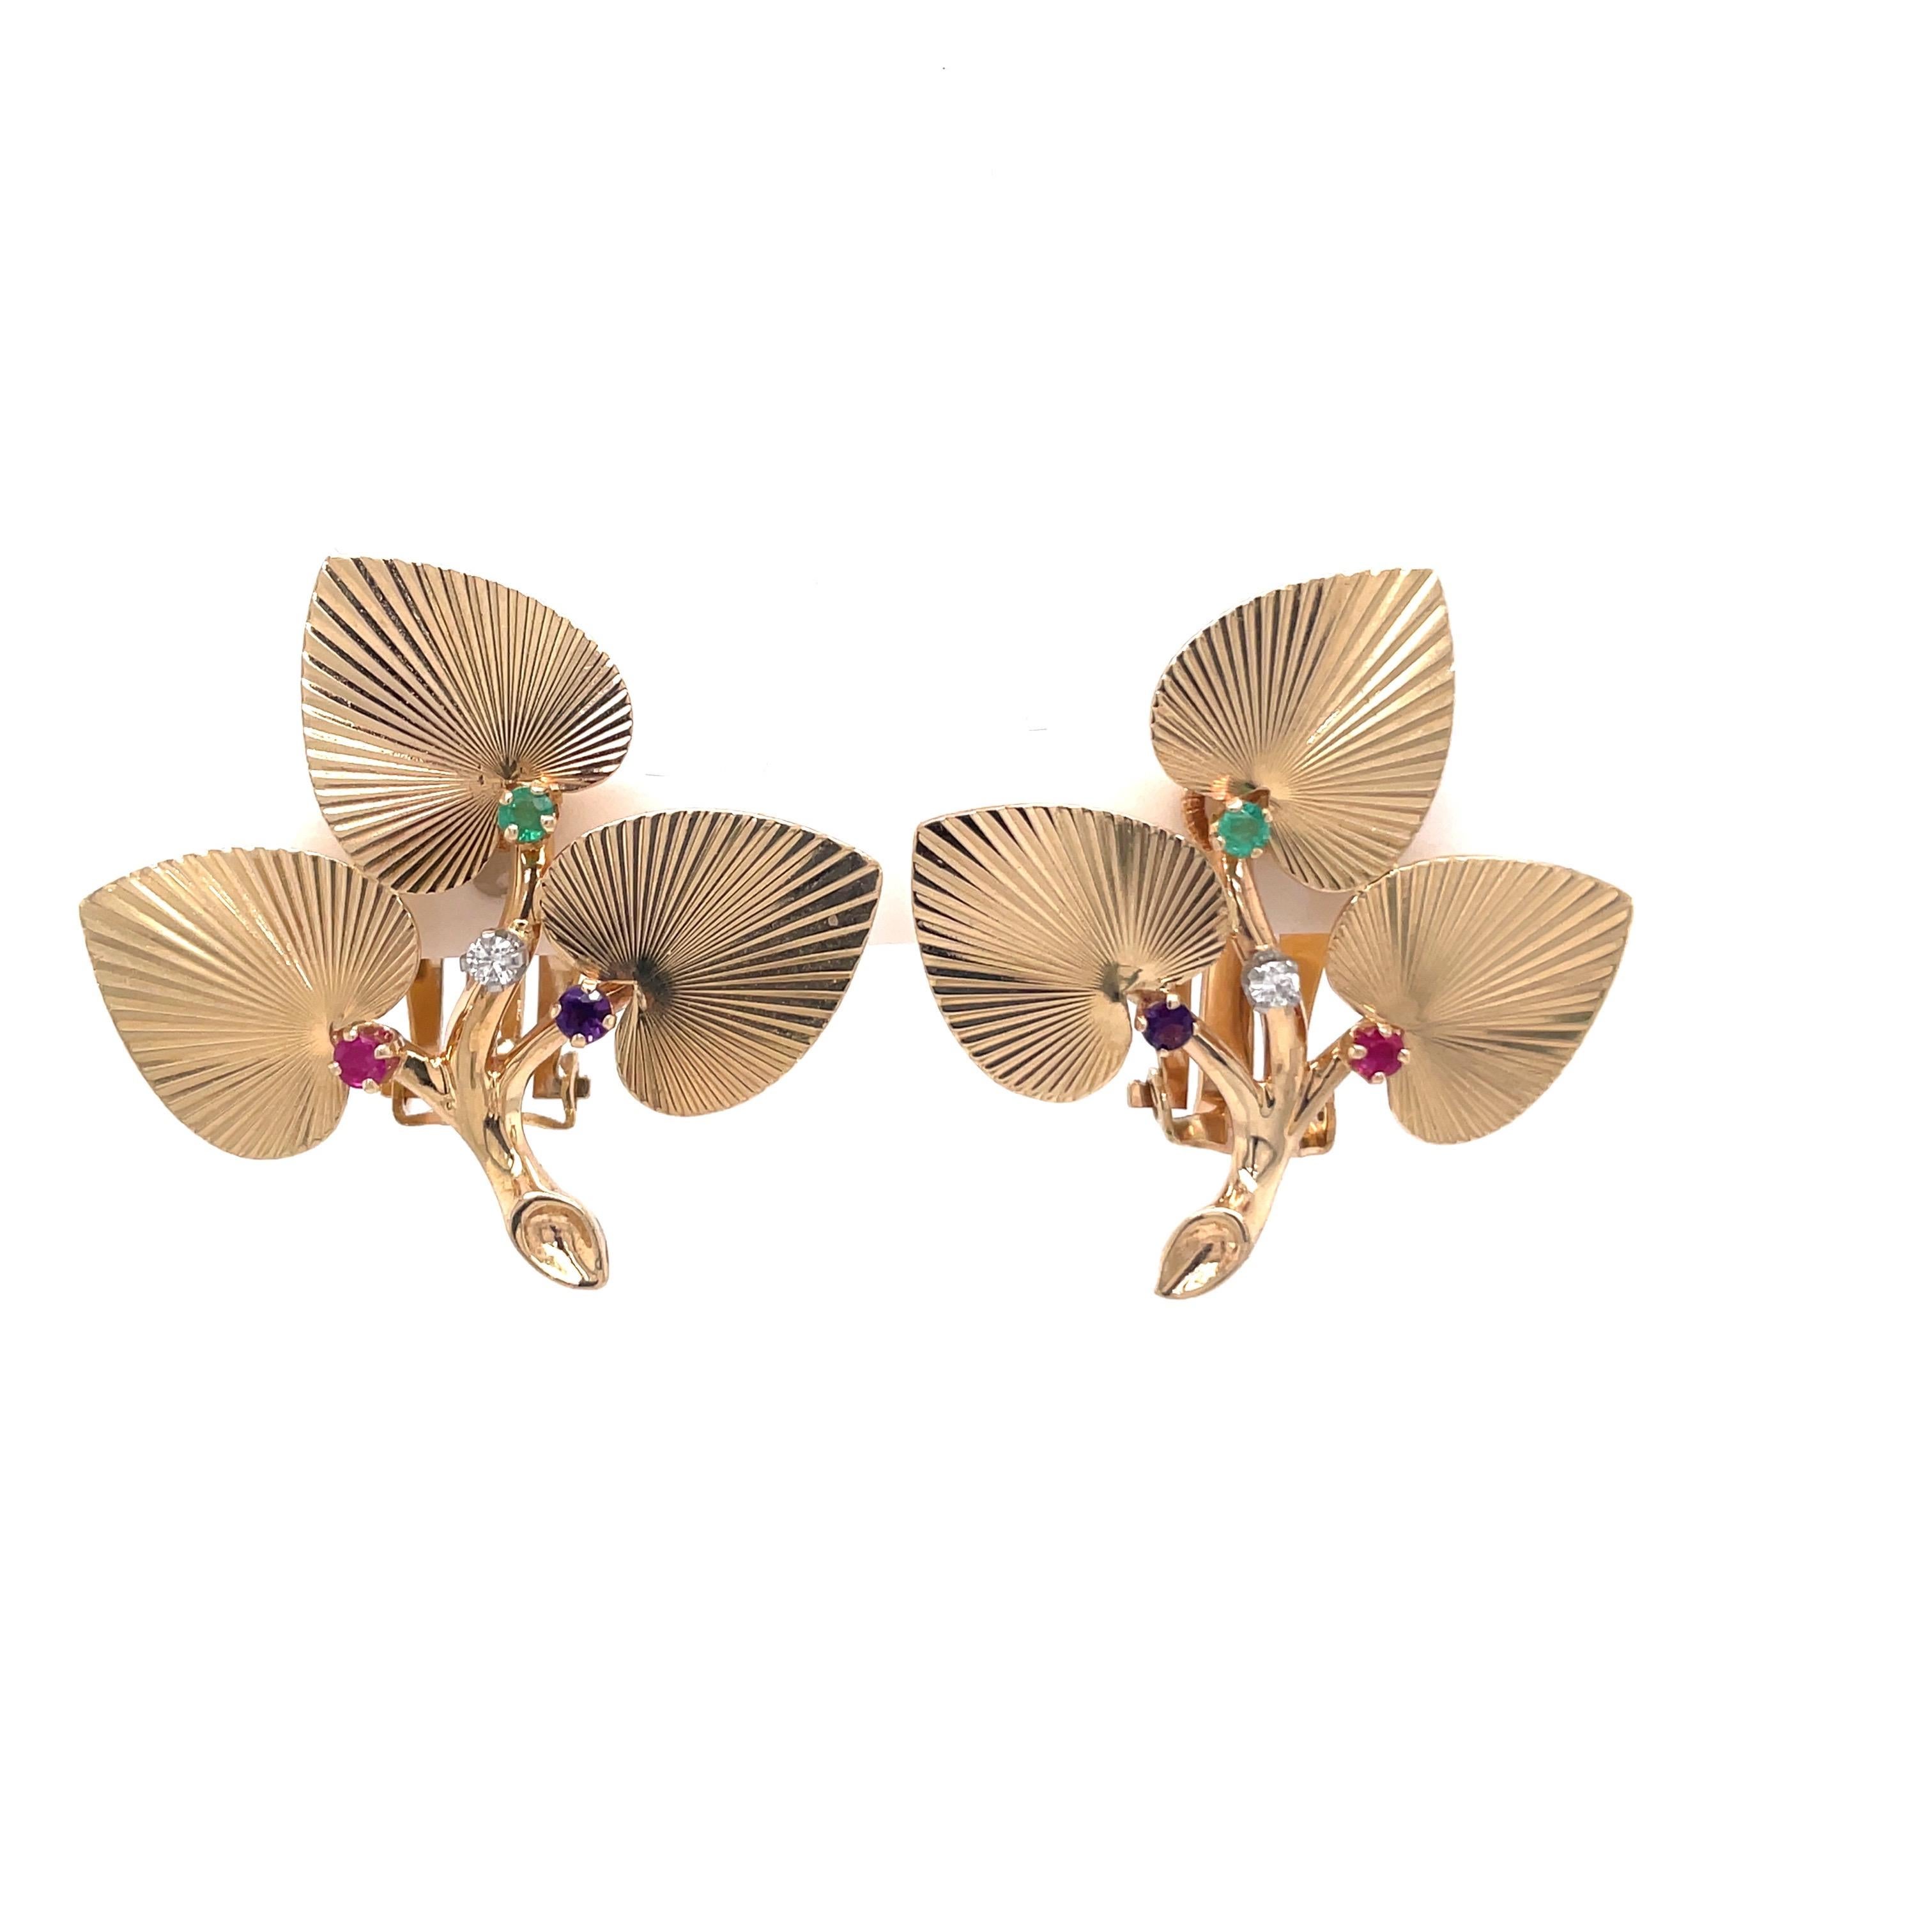 TIFFANY & CO, floral earrings featuring an Emerald, Ruby, Amethyst & Diamond crafted in 14 Karat Yellow Gold. Comes in Tiffany box. 